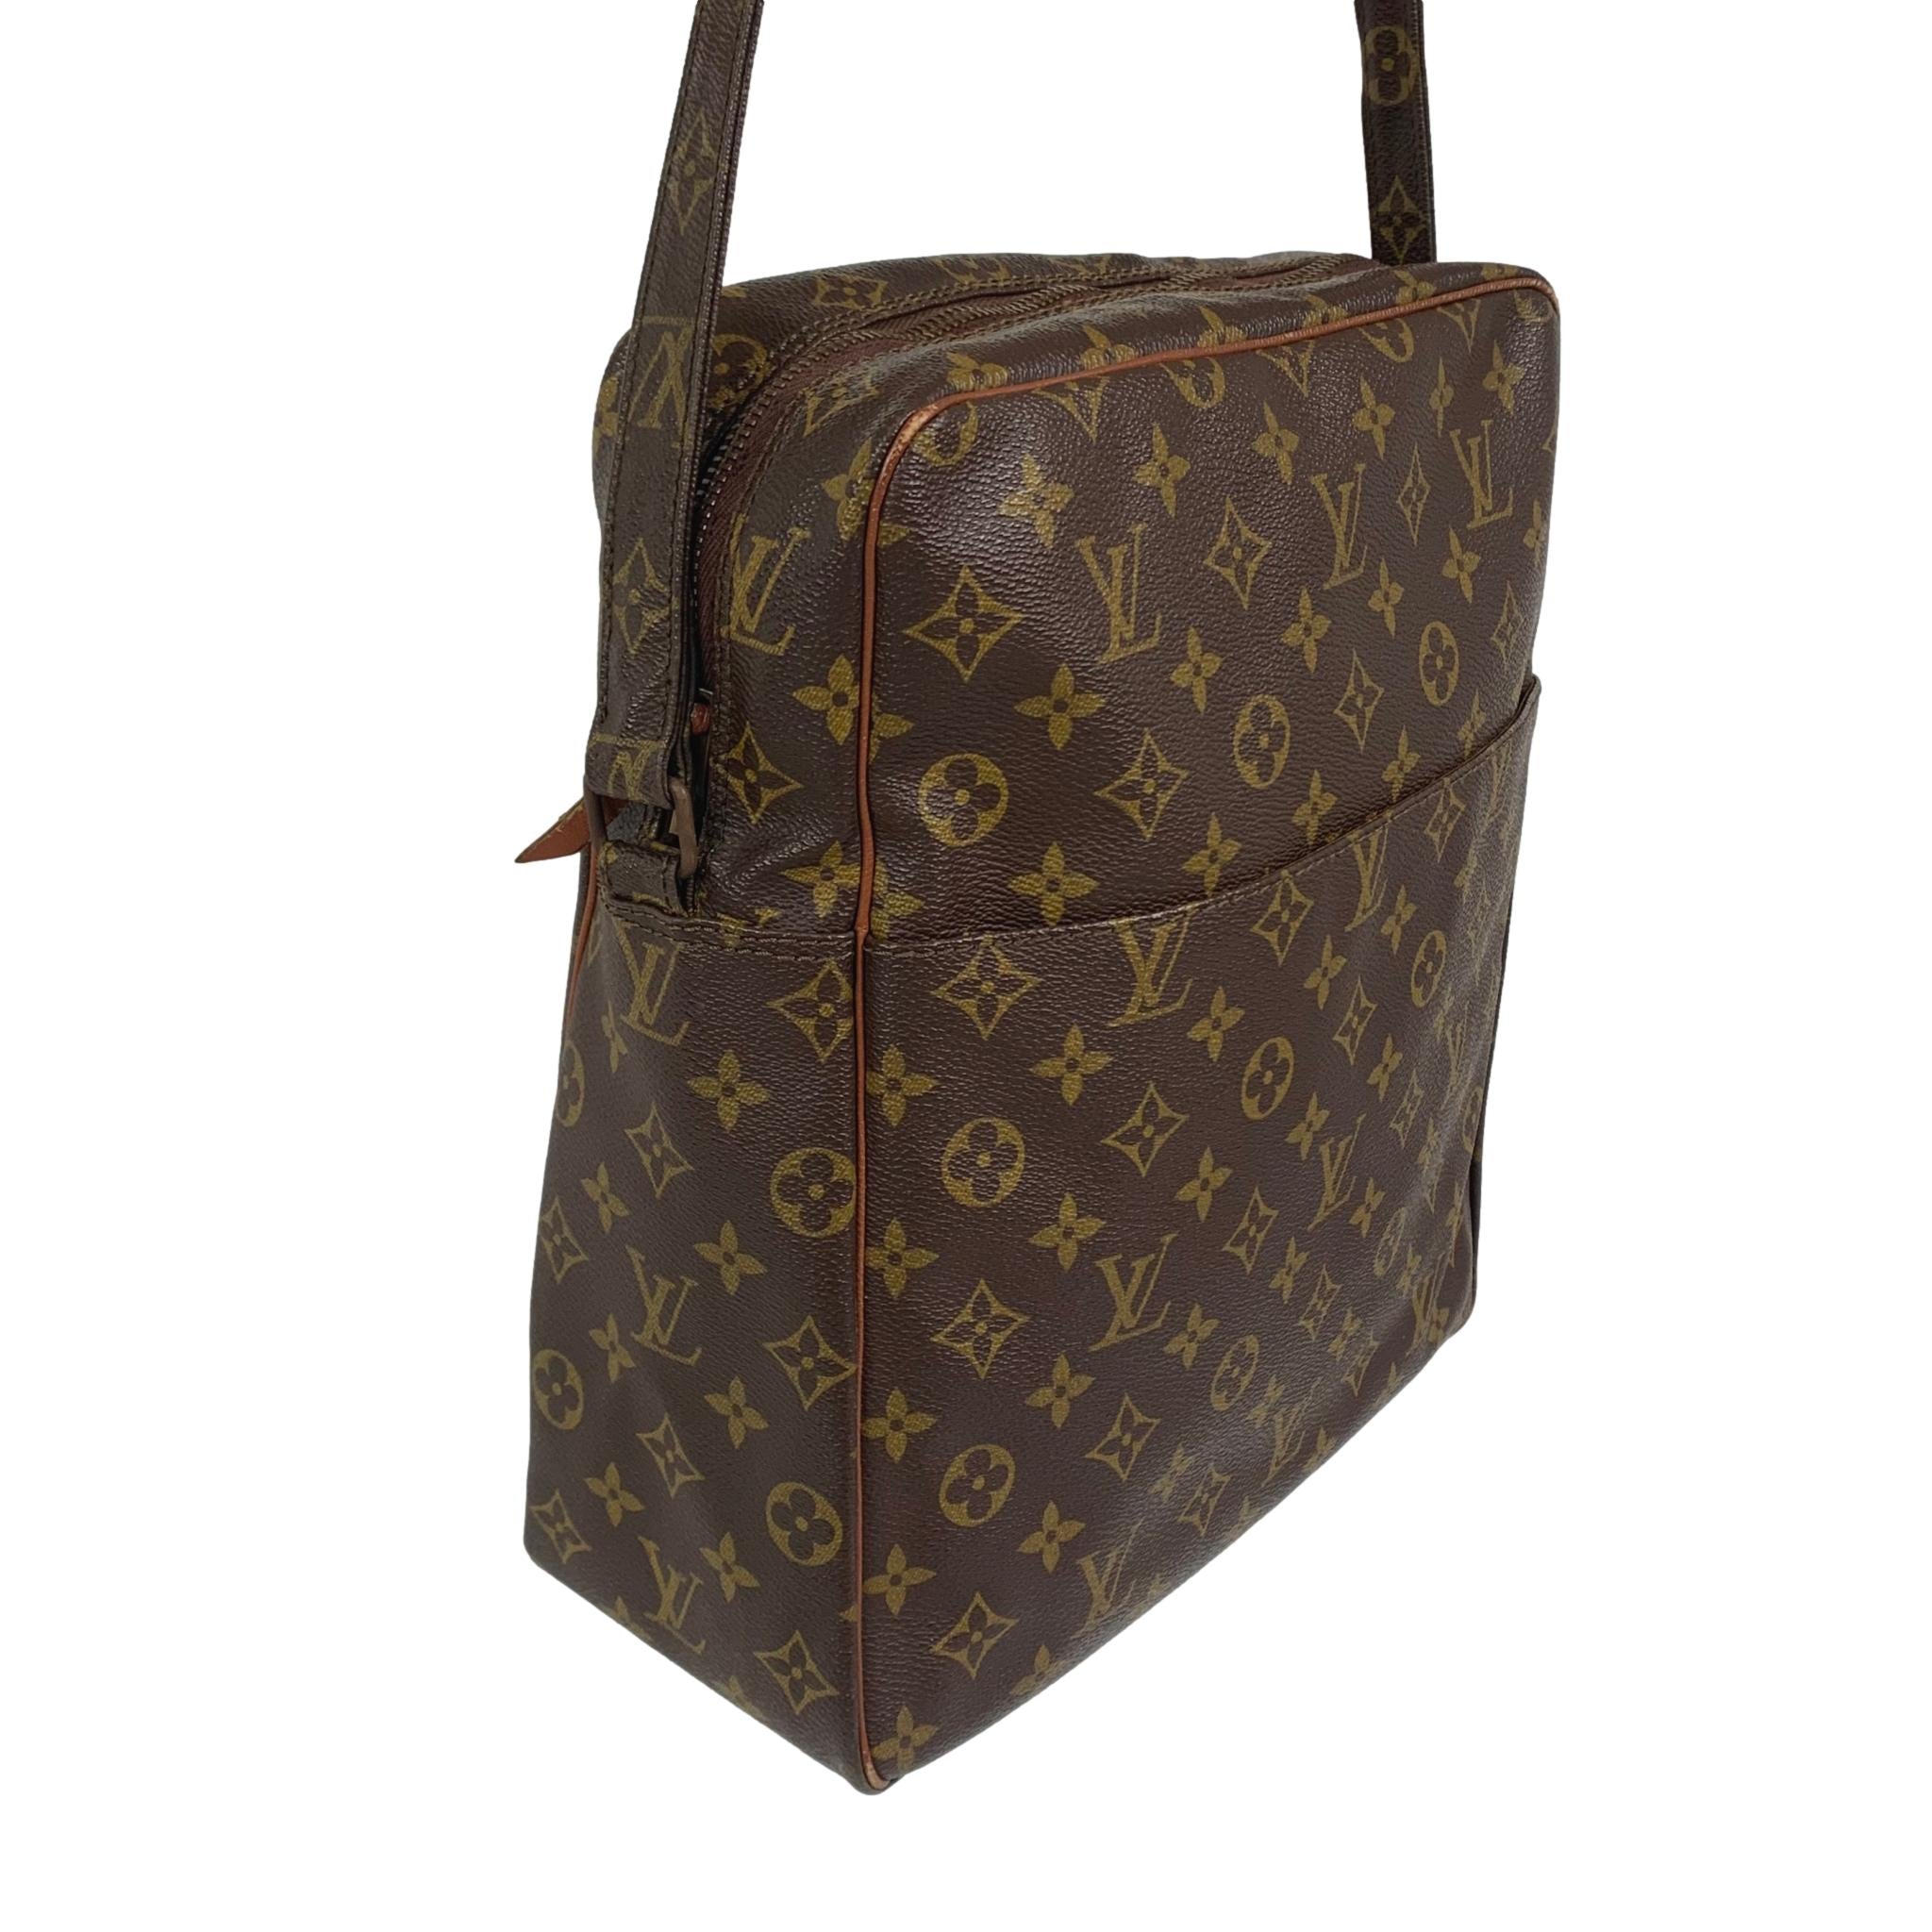 Can't get enough of Louis Vuitton Monogram 🤩 From shoulder bags